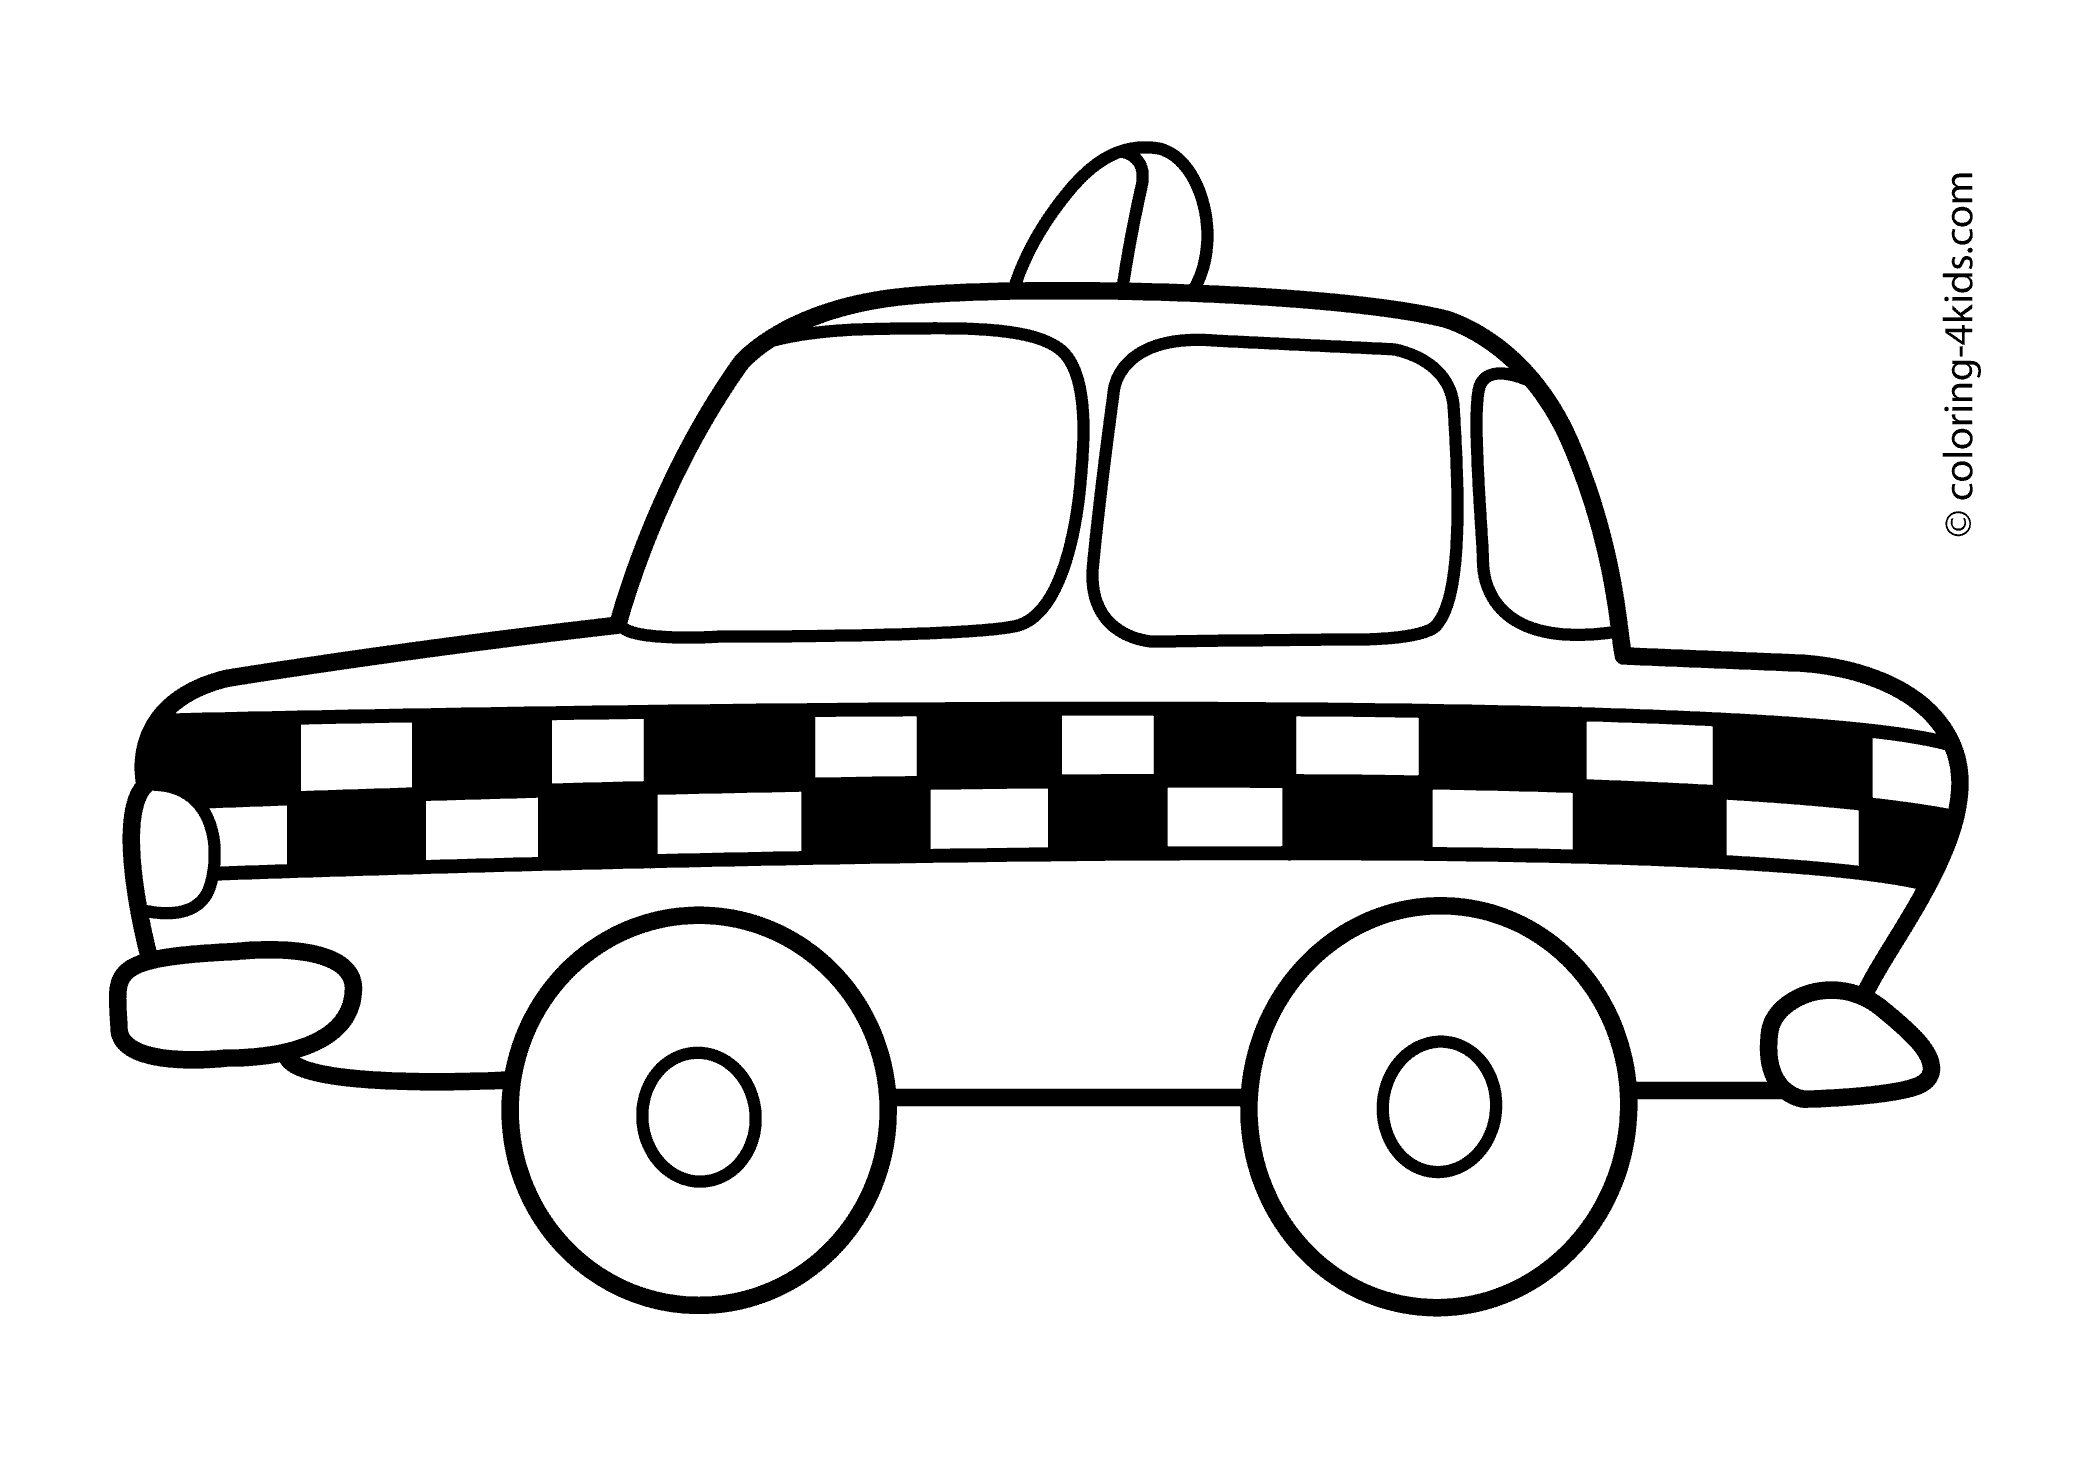 Taxi Transportation Coloring Pages For Kids Printable Free Coloring Pages For Kids Co